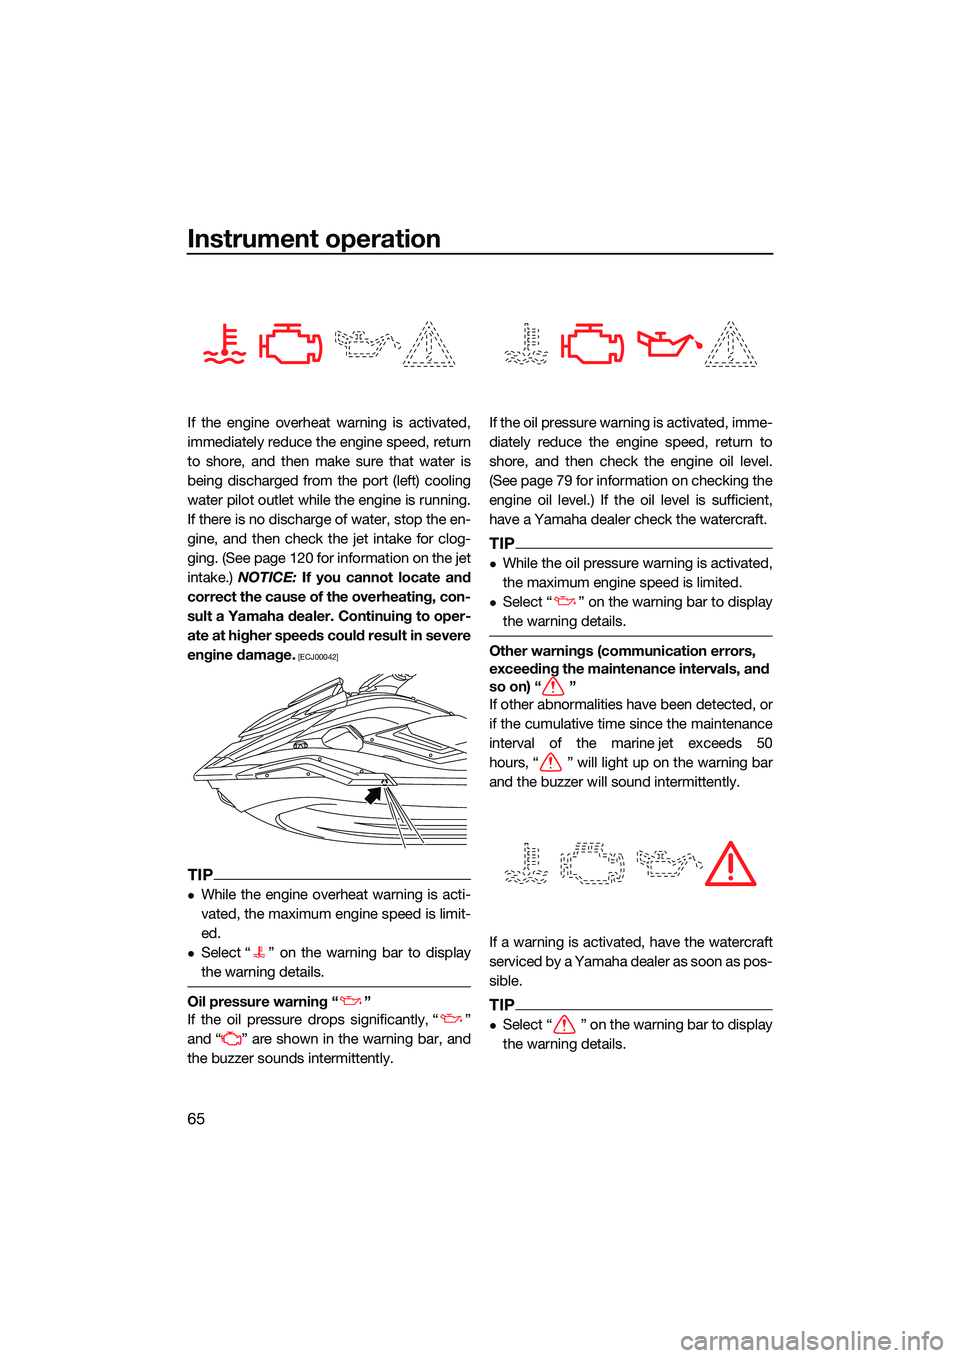 YAMAHA FX HO CRUISER 2022  Owners Manual Instrument operation
65
If the engine overheat warning is activated,
immediately reduce the engine speed, return
to shore, and then make sure that water is
being discharged from the port (left) coolin